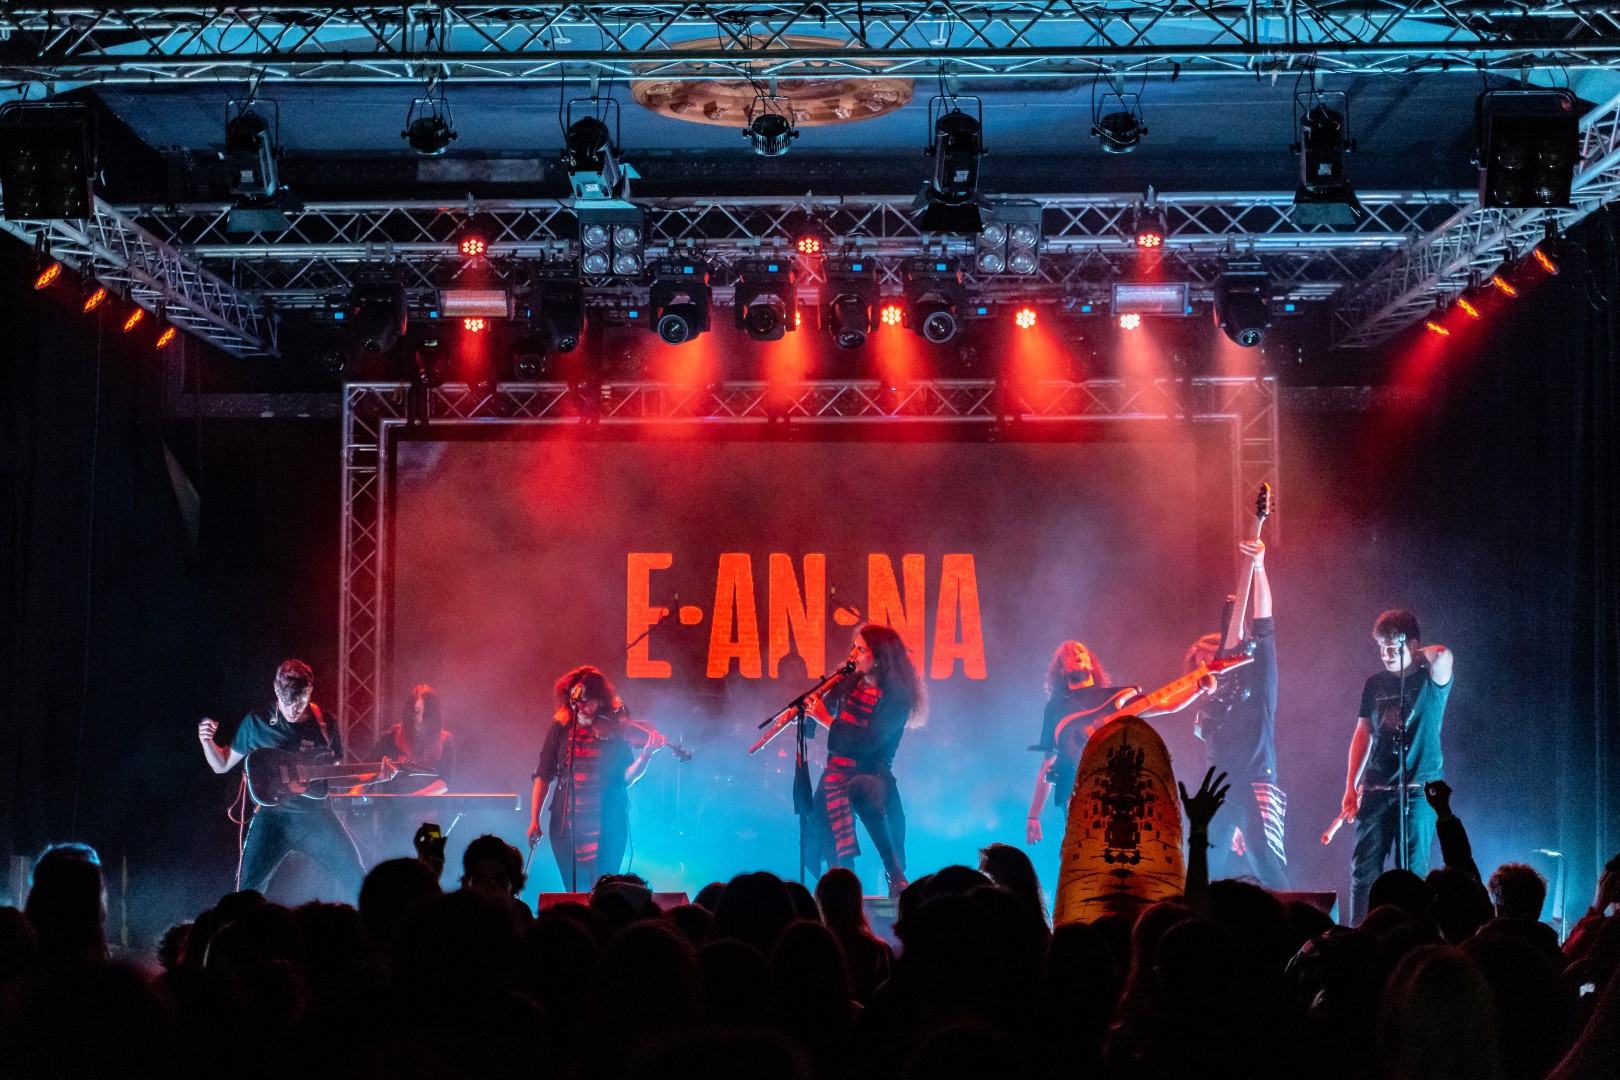 E-an-na at Quantic in Bucharest on March 5, 2022 (d5ac75d4e2)